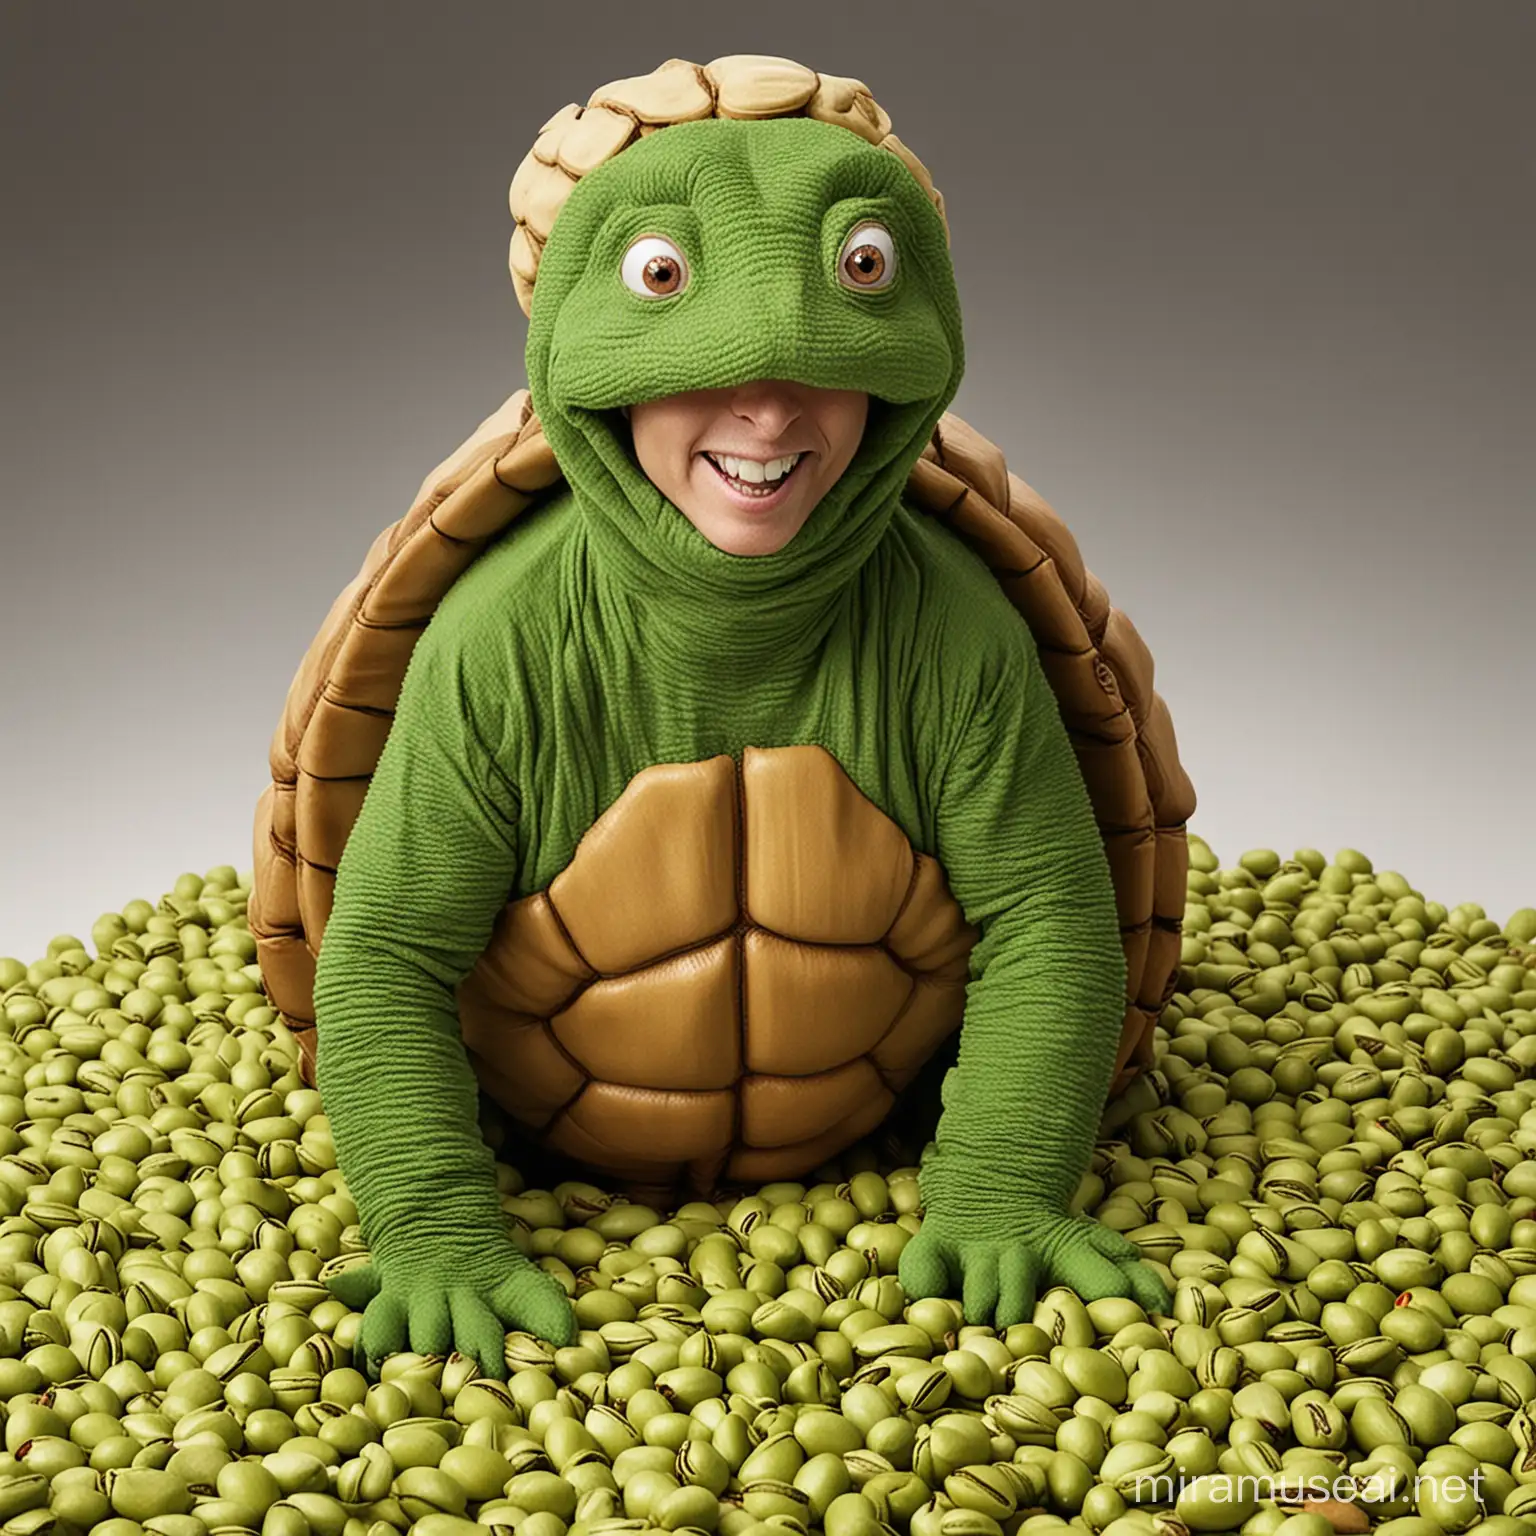 Dana Carvey dressed as a turtle and surrounded by pistachios 